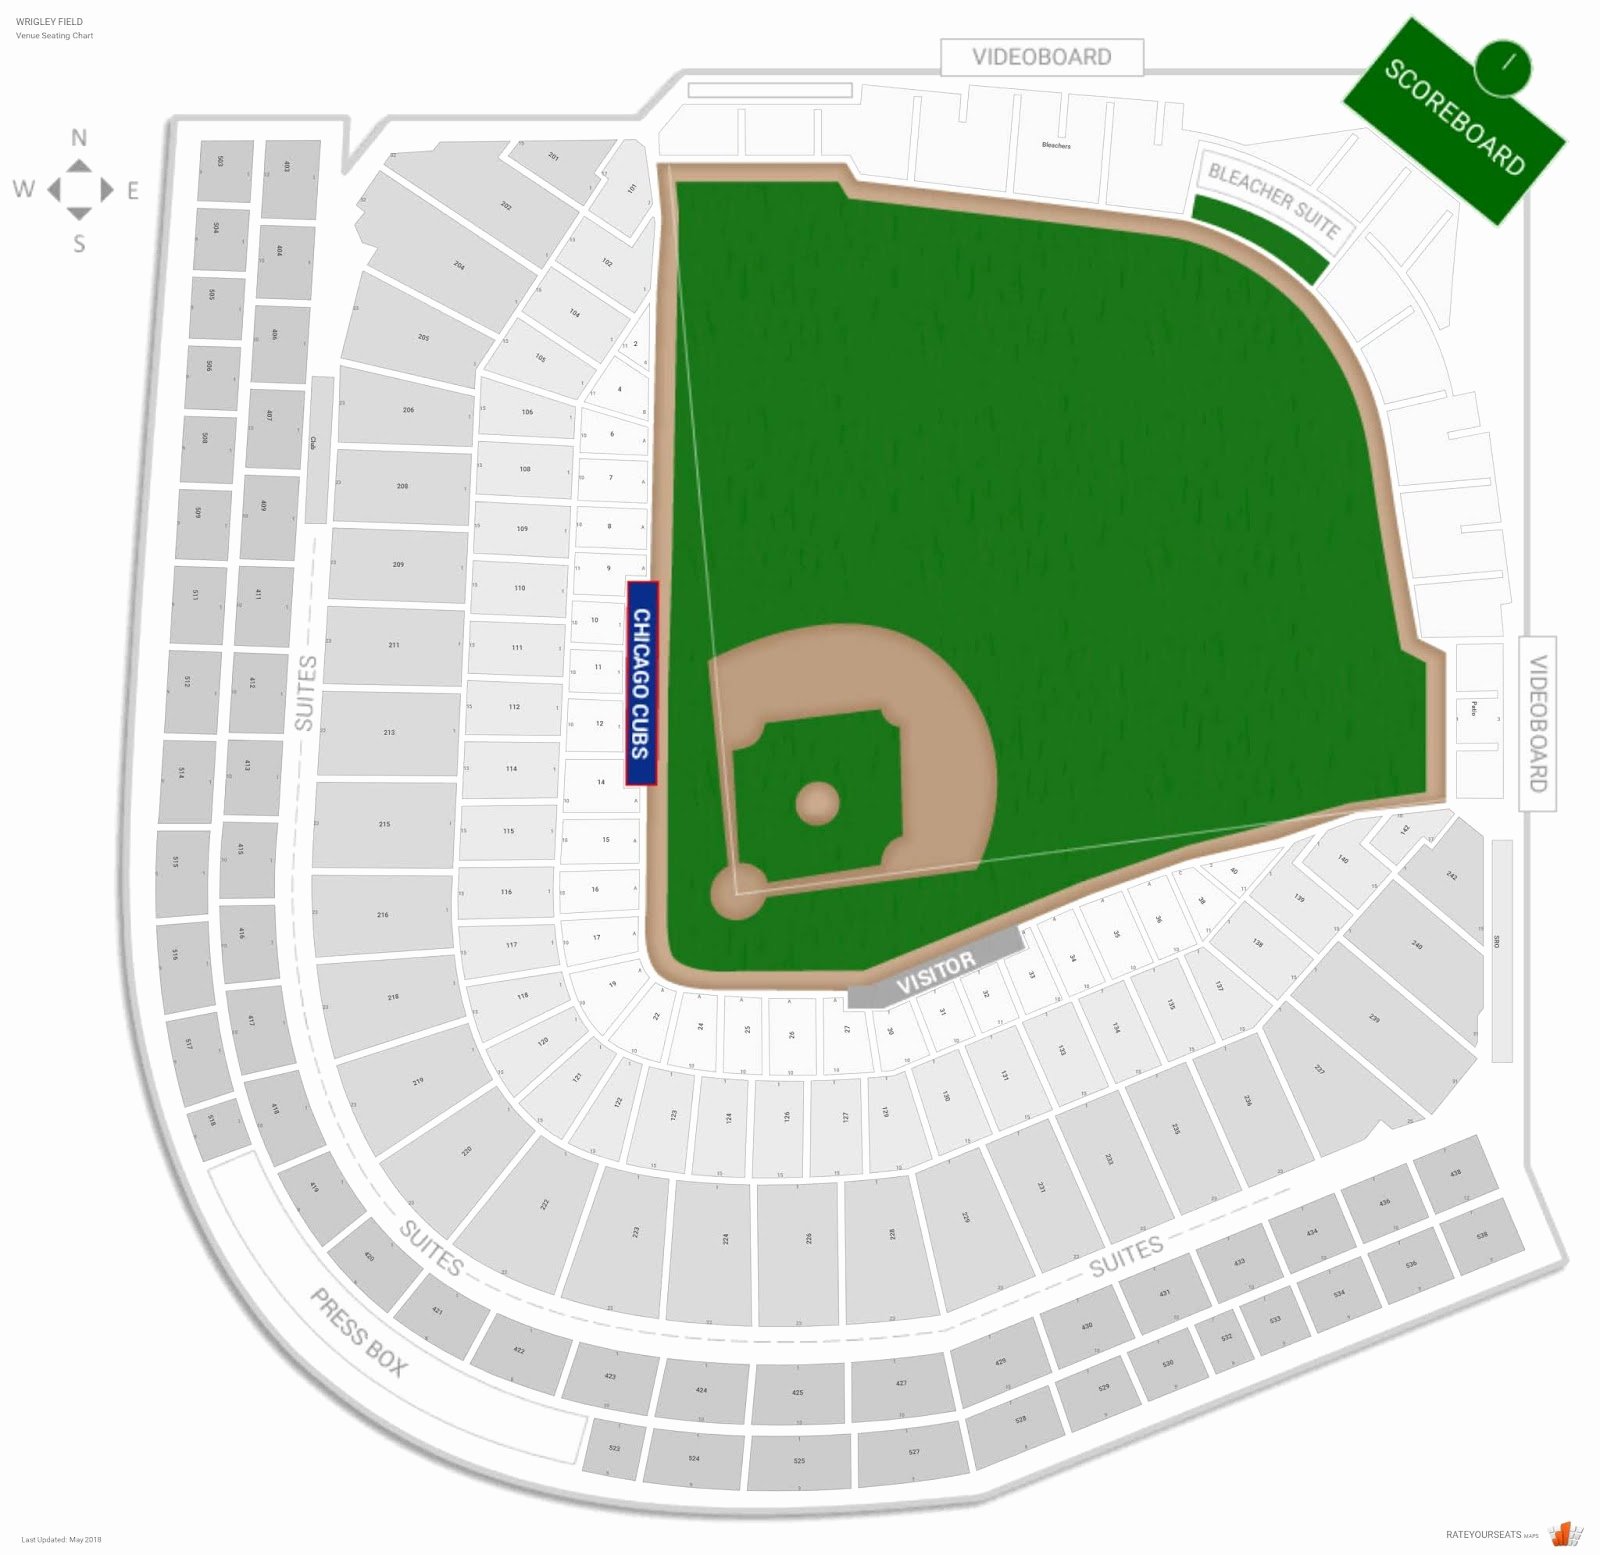 Wrigley Seating Chart with Seat Numbers Fresh Fresh Wrigley Field Seating Chart with Seat Numbers